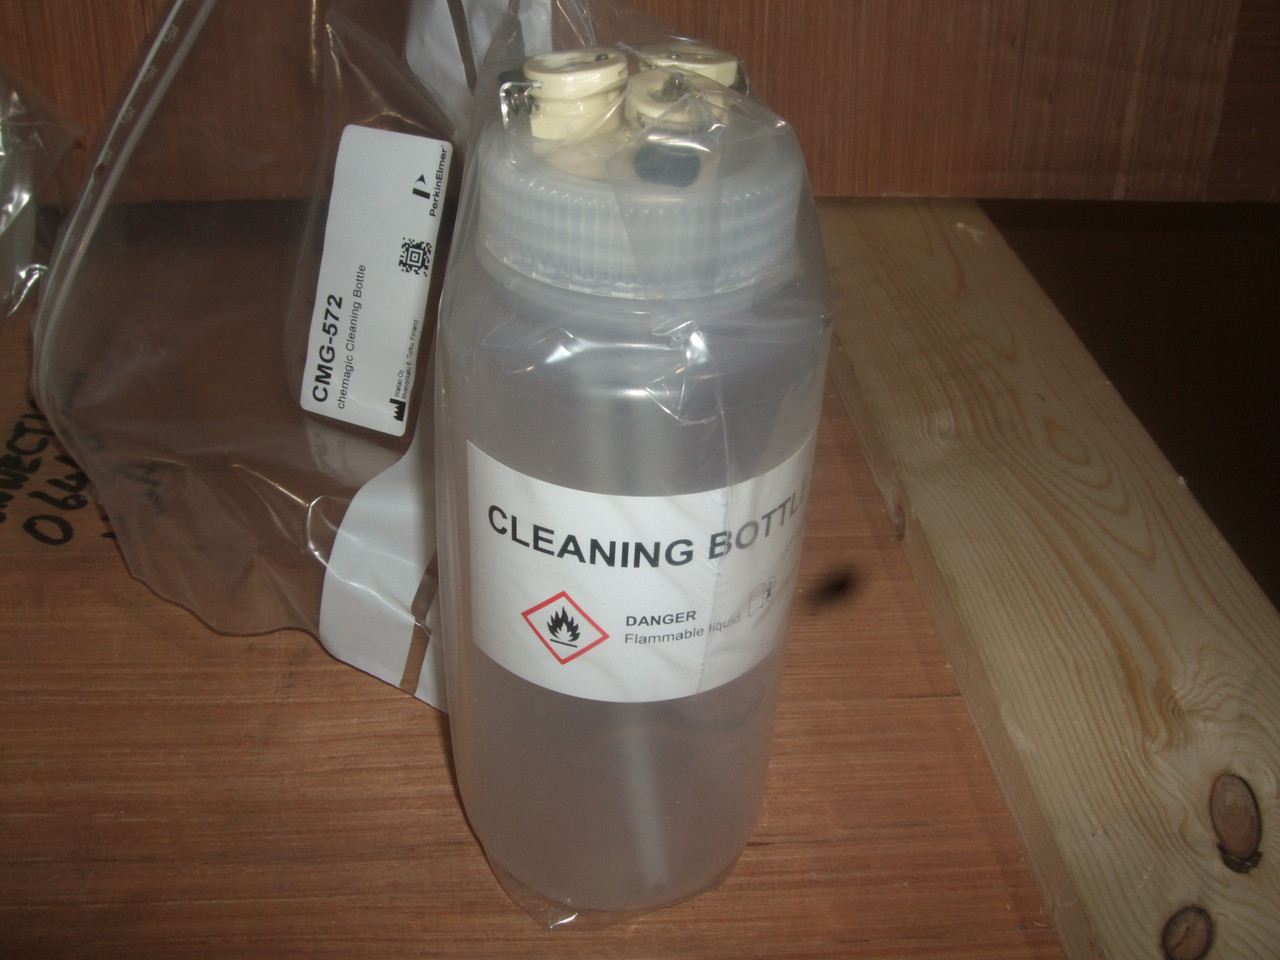 (Pack of 2) PerkinElmer CMG-572 Chemagic Cleaning Bottle